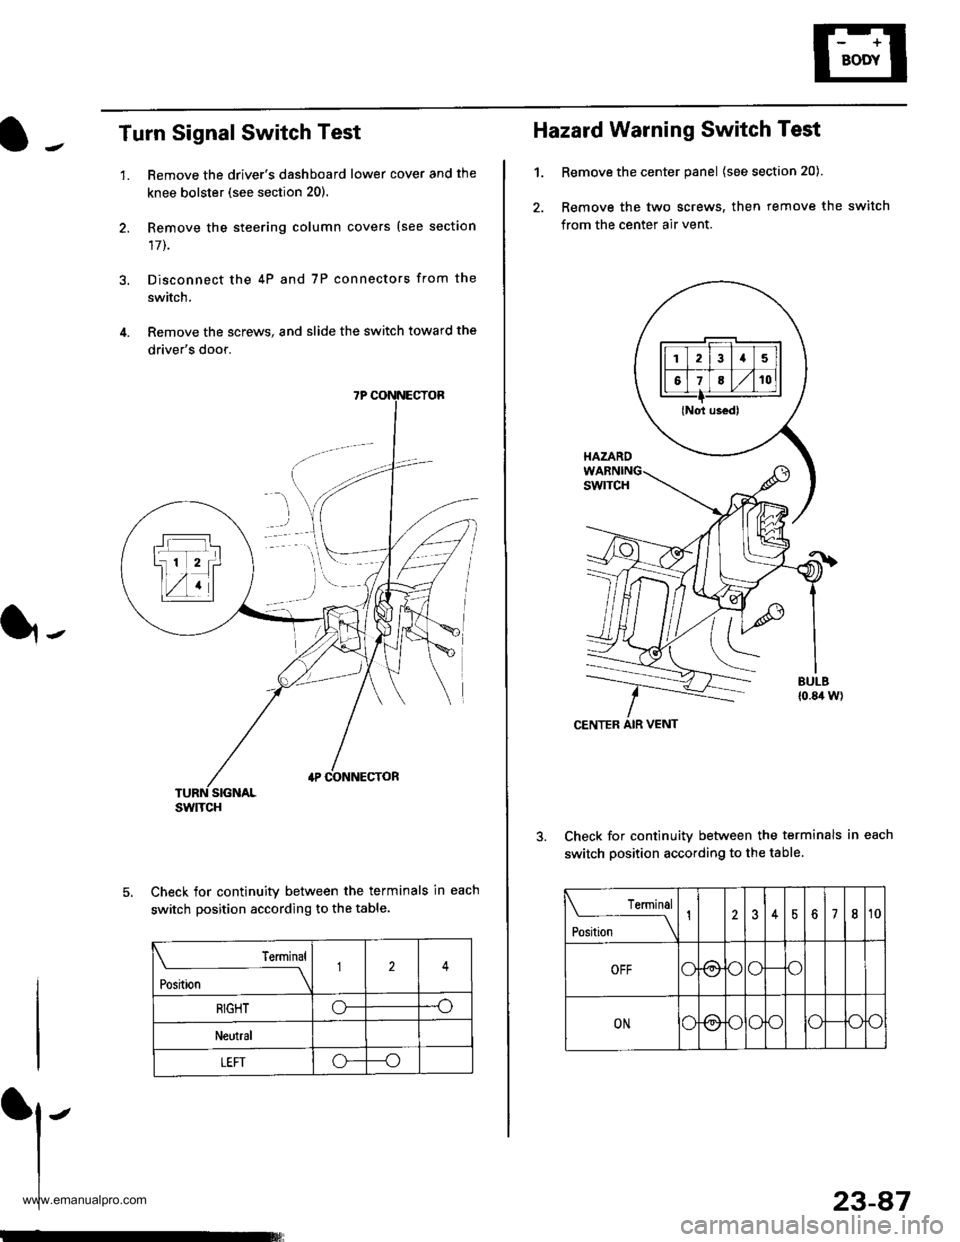 HONDA CR-V 2000 RD1-RD3 / 1.G User Guide 
Turn Signal Switch Test
1.
4.
Remove the drivers dashboard lower cover and the
knee bolster (see section 20).
Remove the steering column covers {see section
17]-.
Disconnect the 4P and 7P connectors